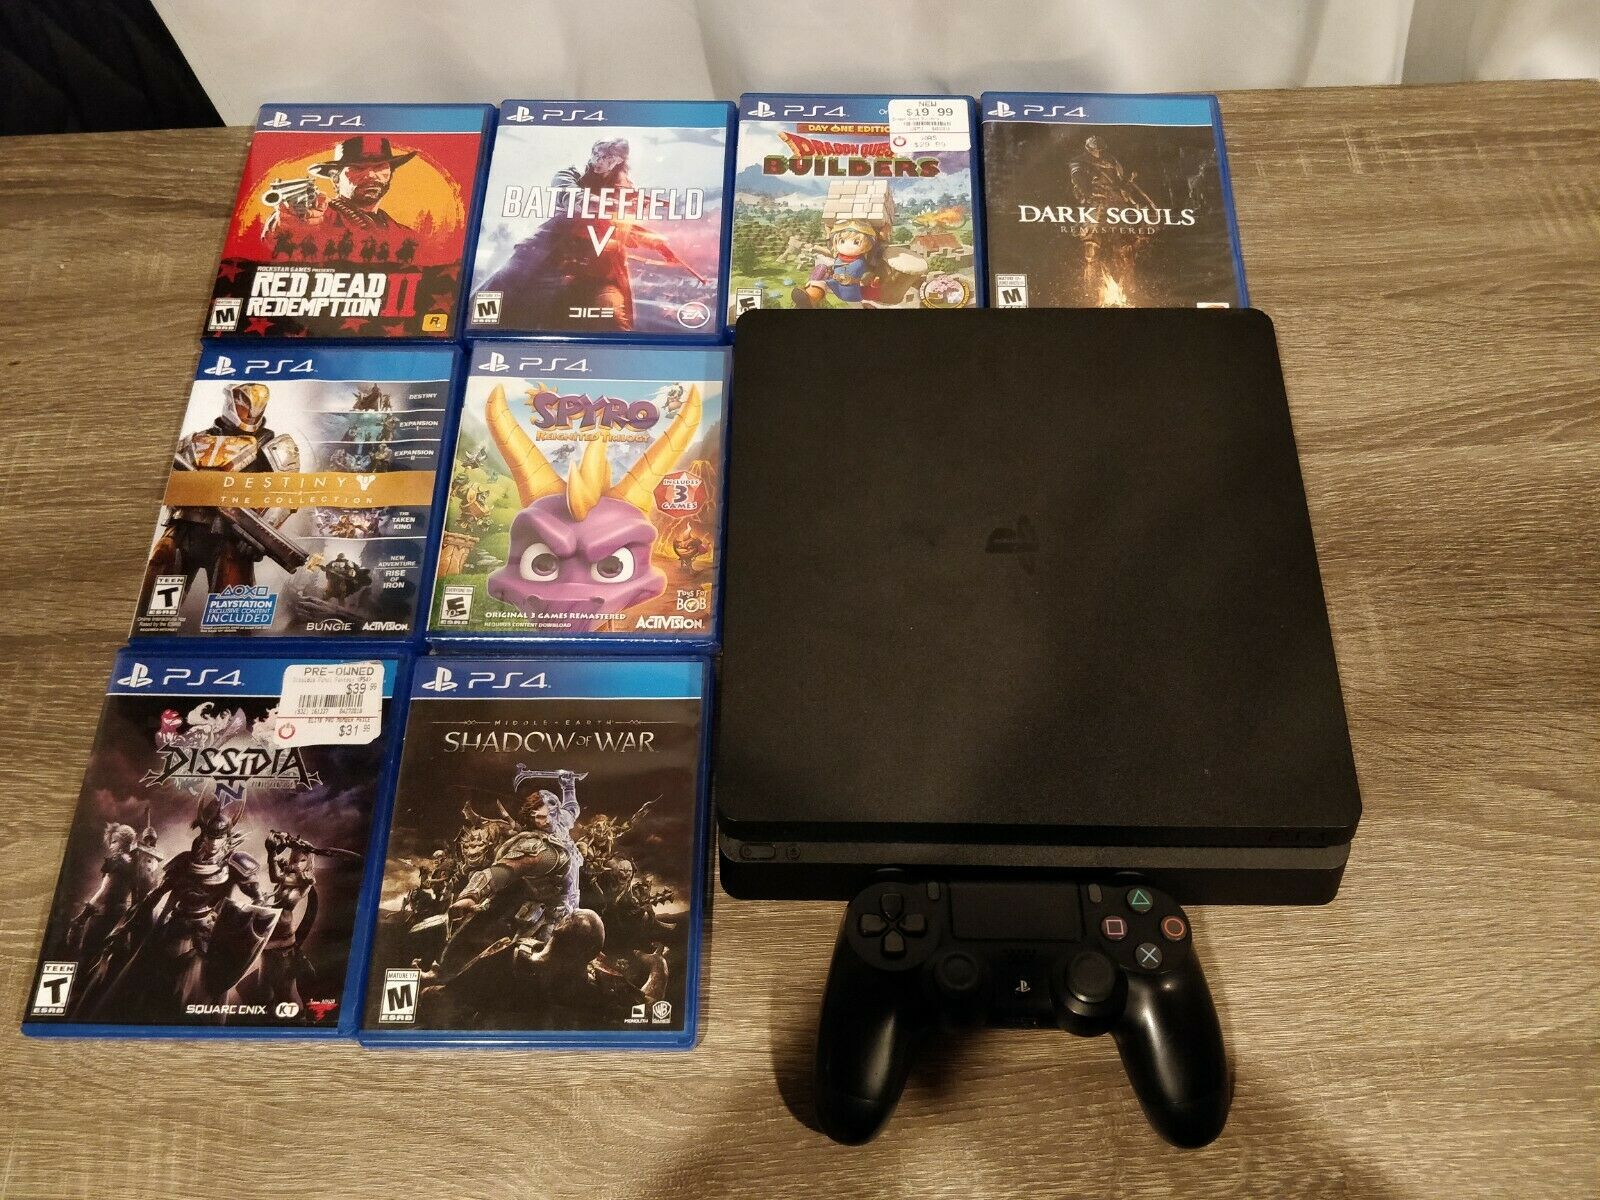 Sony Playstation4 PS4 Slim 500GB Black Console CUH-2015A with 8 games